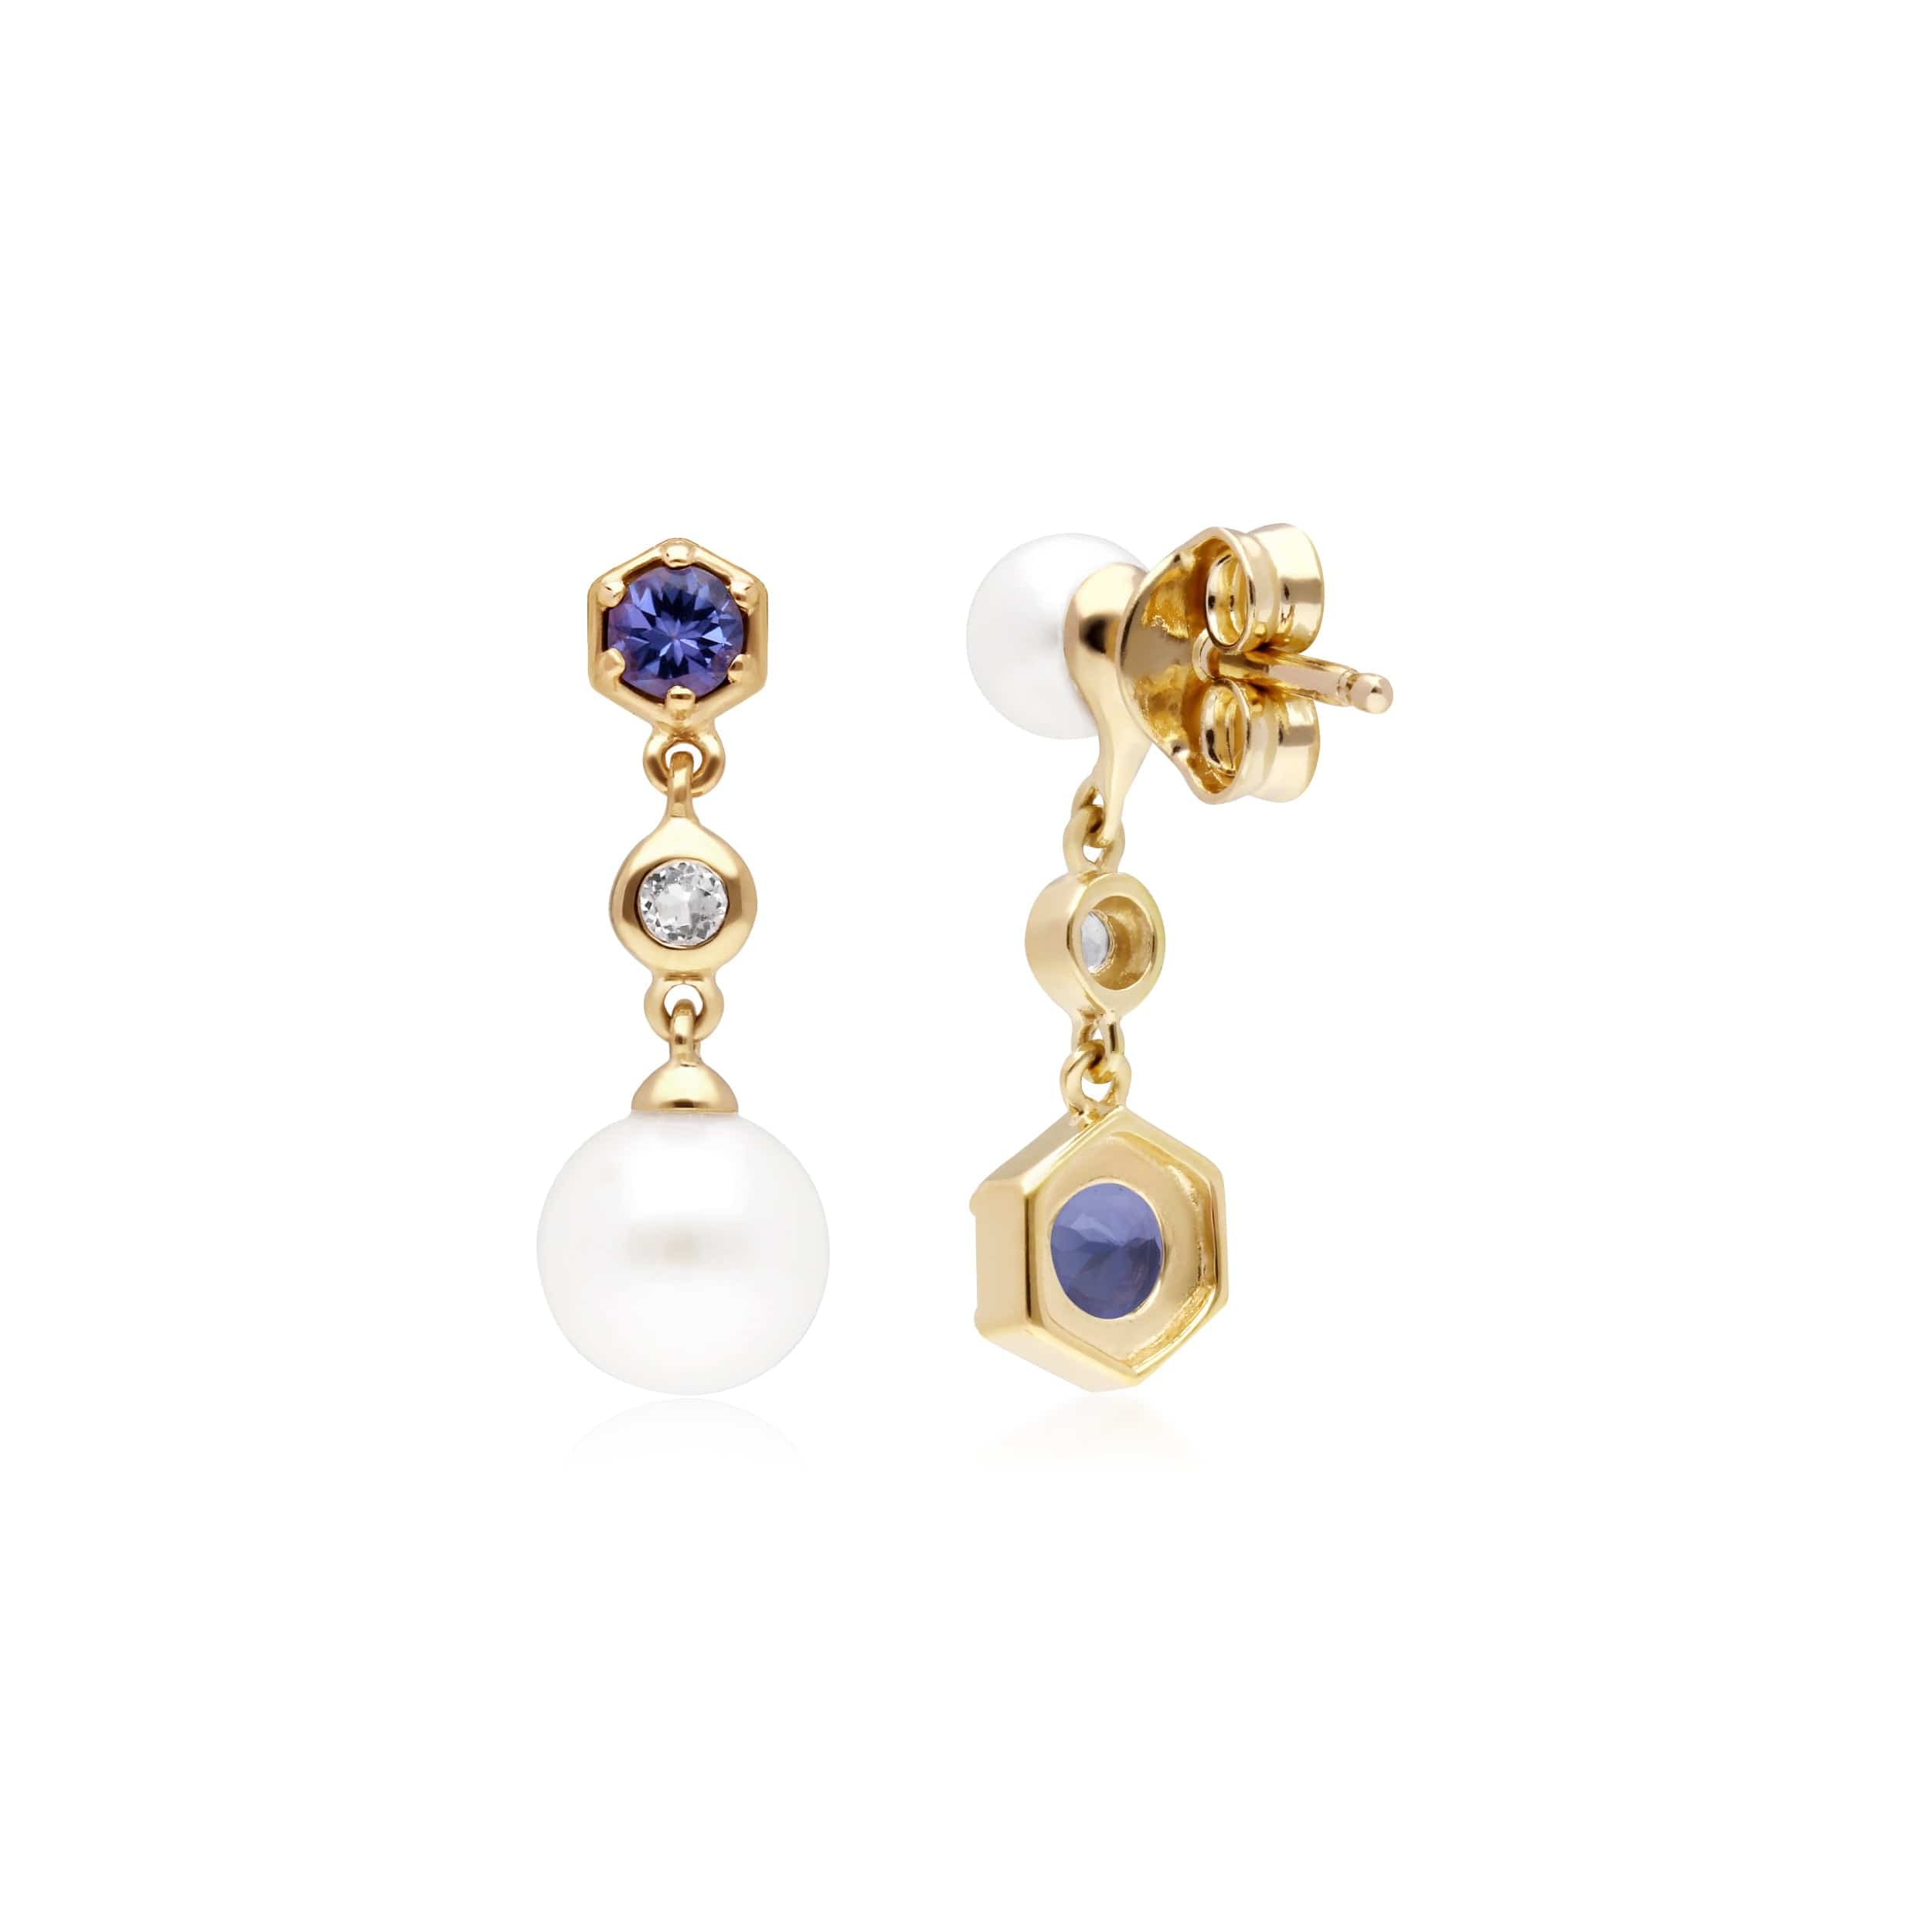 Modern Pearl, Tanzanite & Topaz Mismatched Drop Earrings in Gold Plated Sterling Silver 1